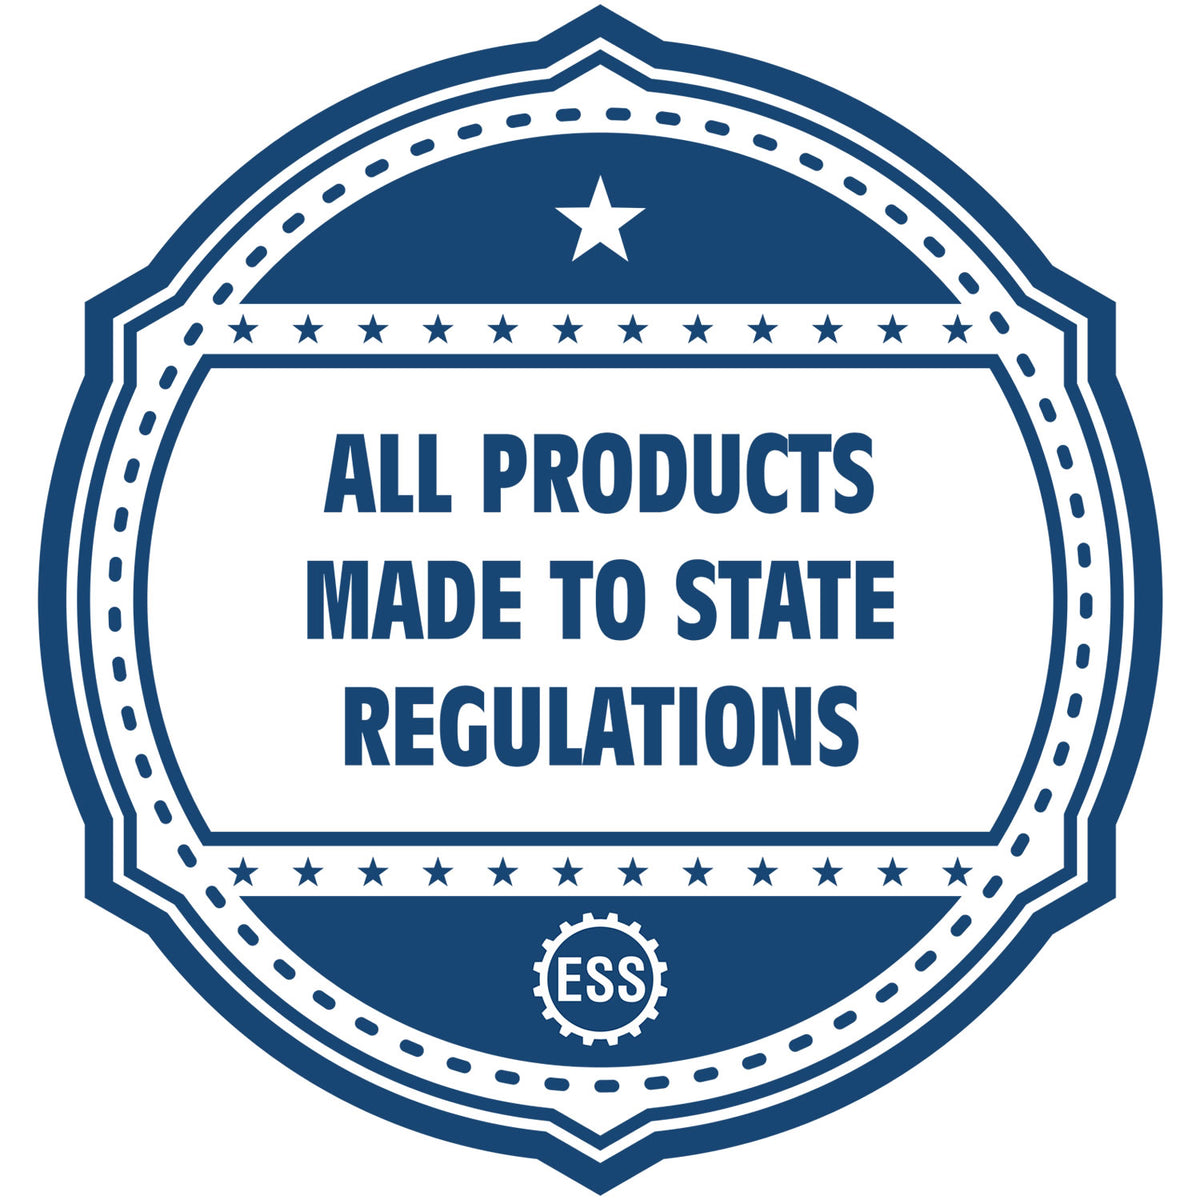 An icon or badge element for the Slim Pre-Inked State Seal Notary Stamp for California showing that this product is made in compliance with state regulations.